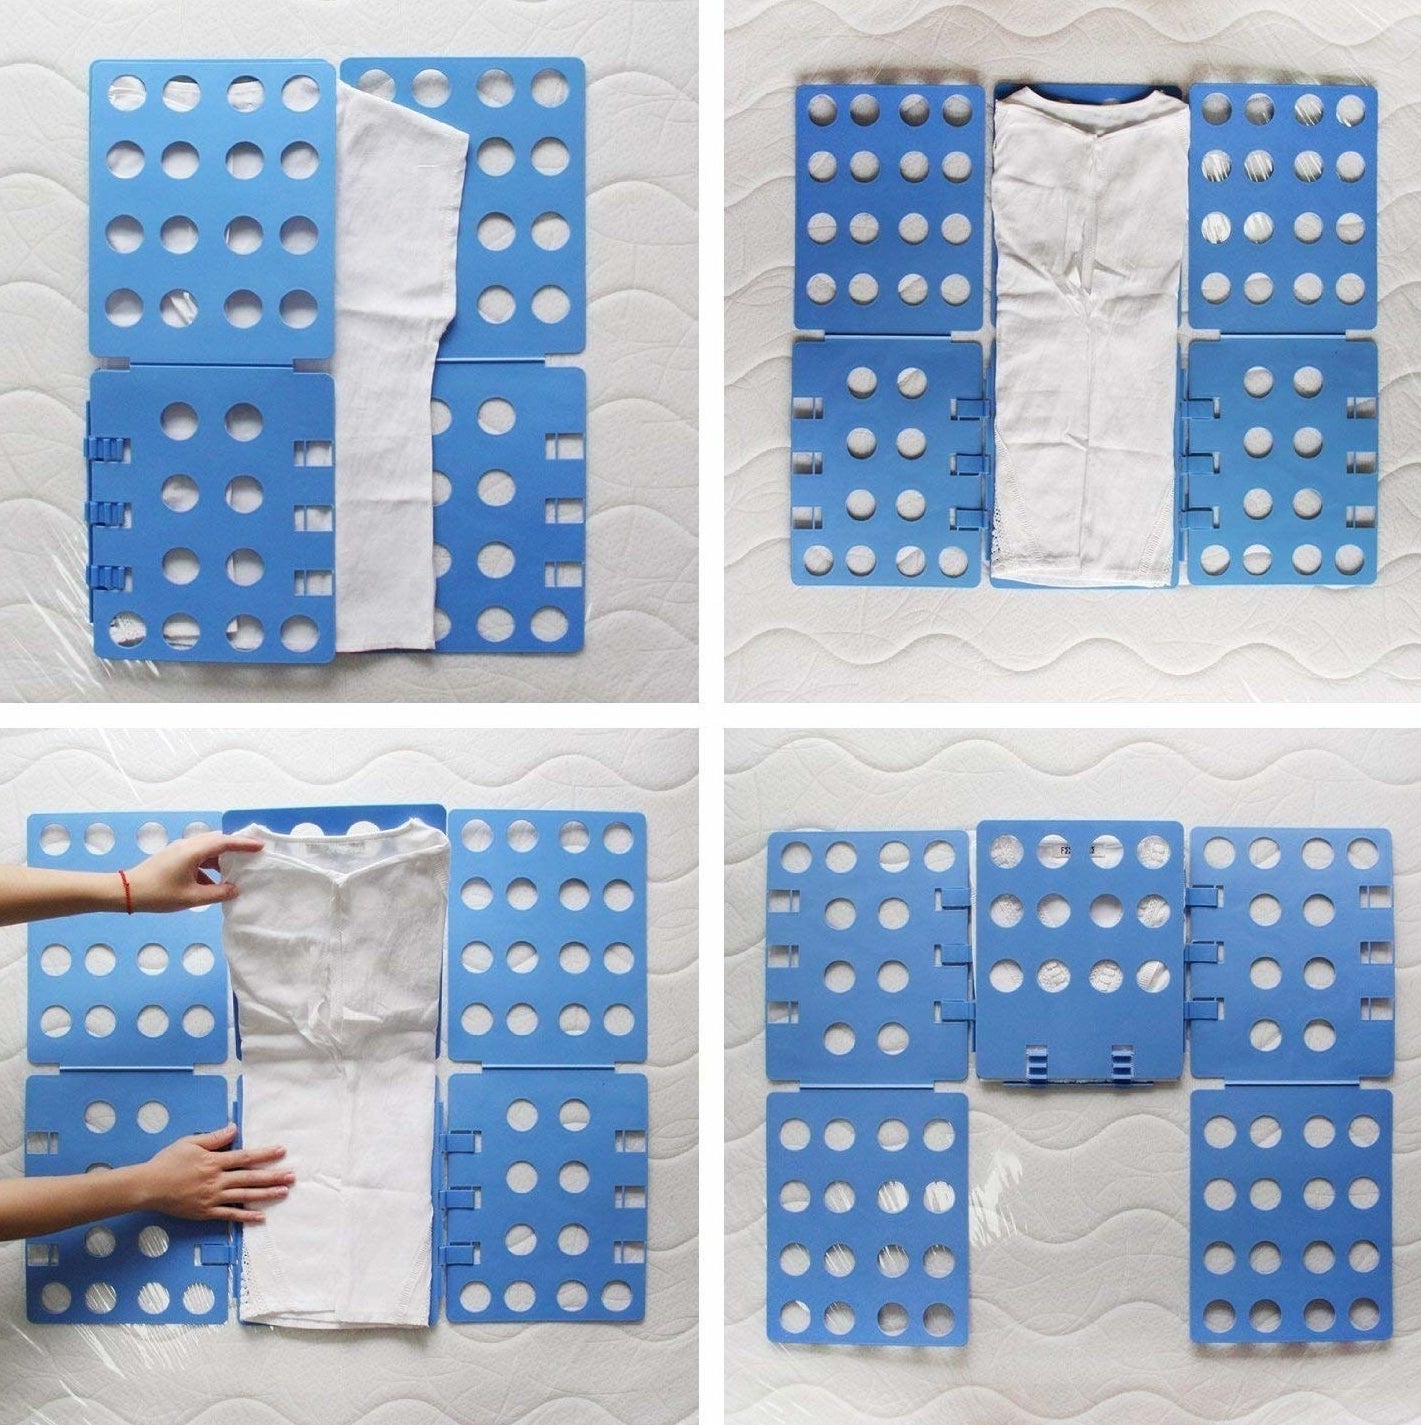 a white shirt being folded on a blue folder